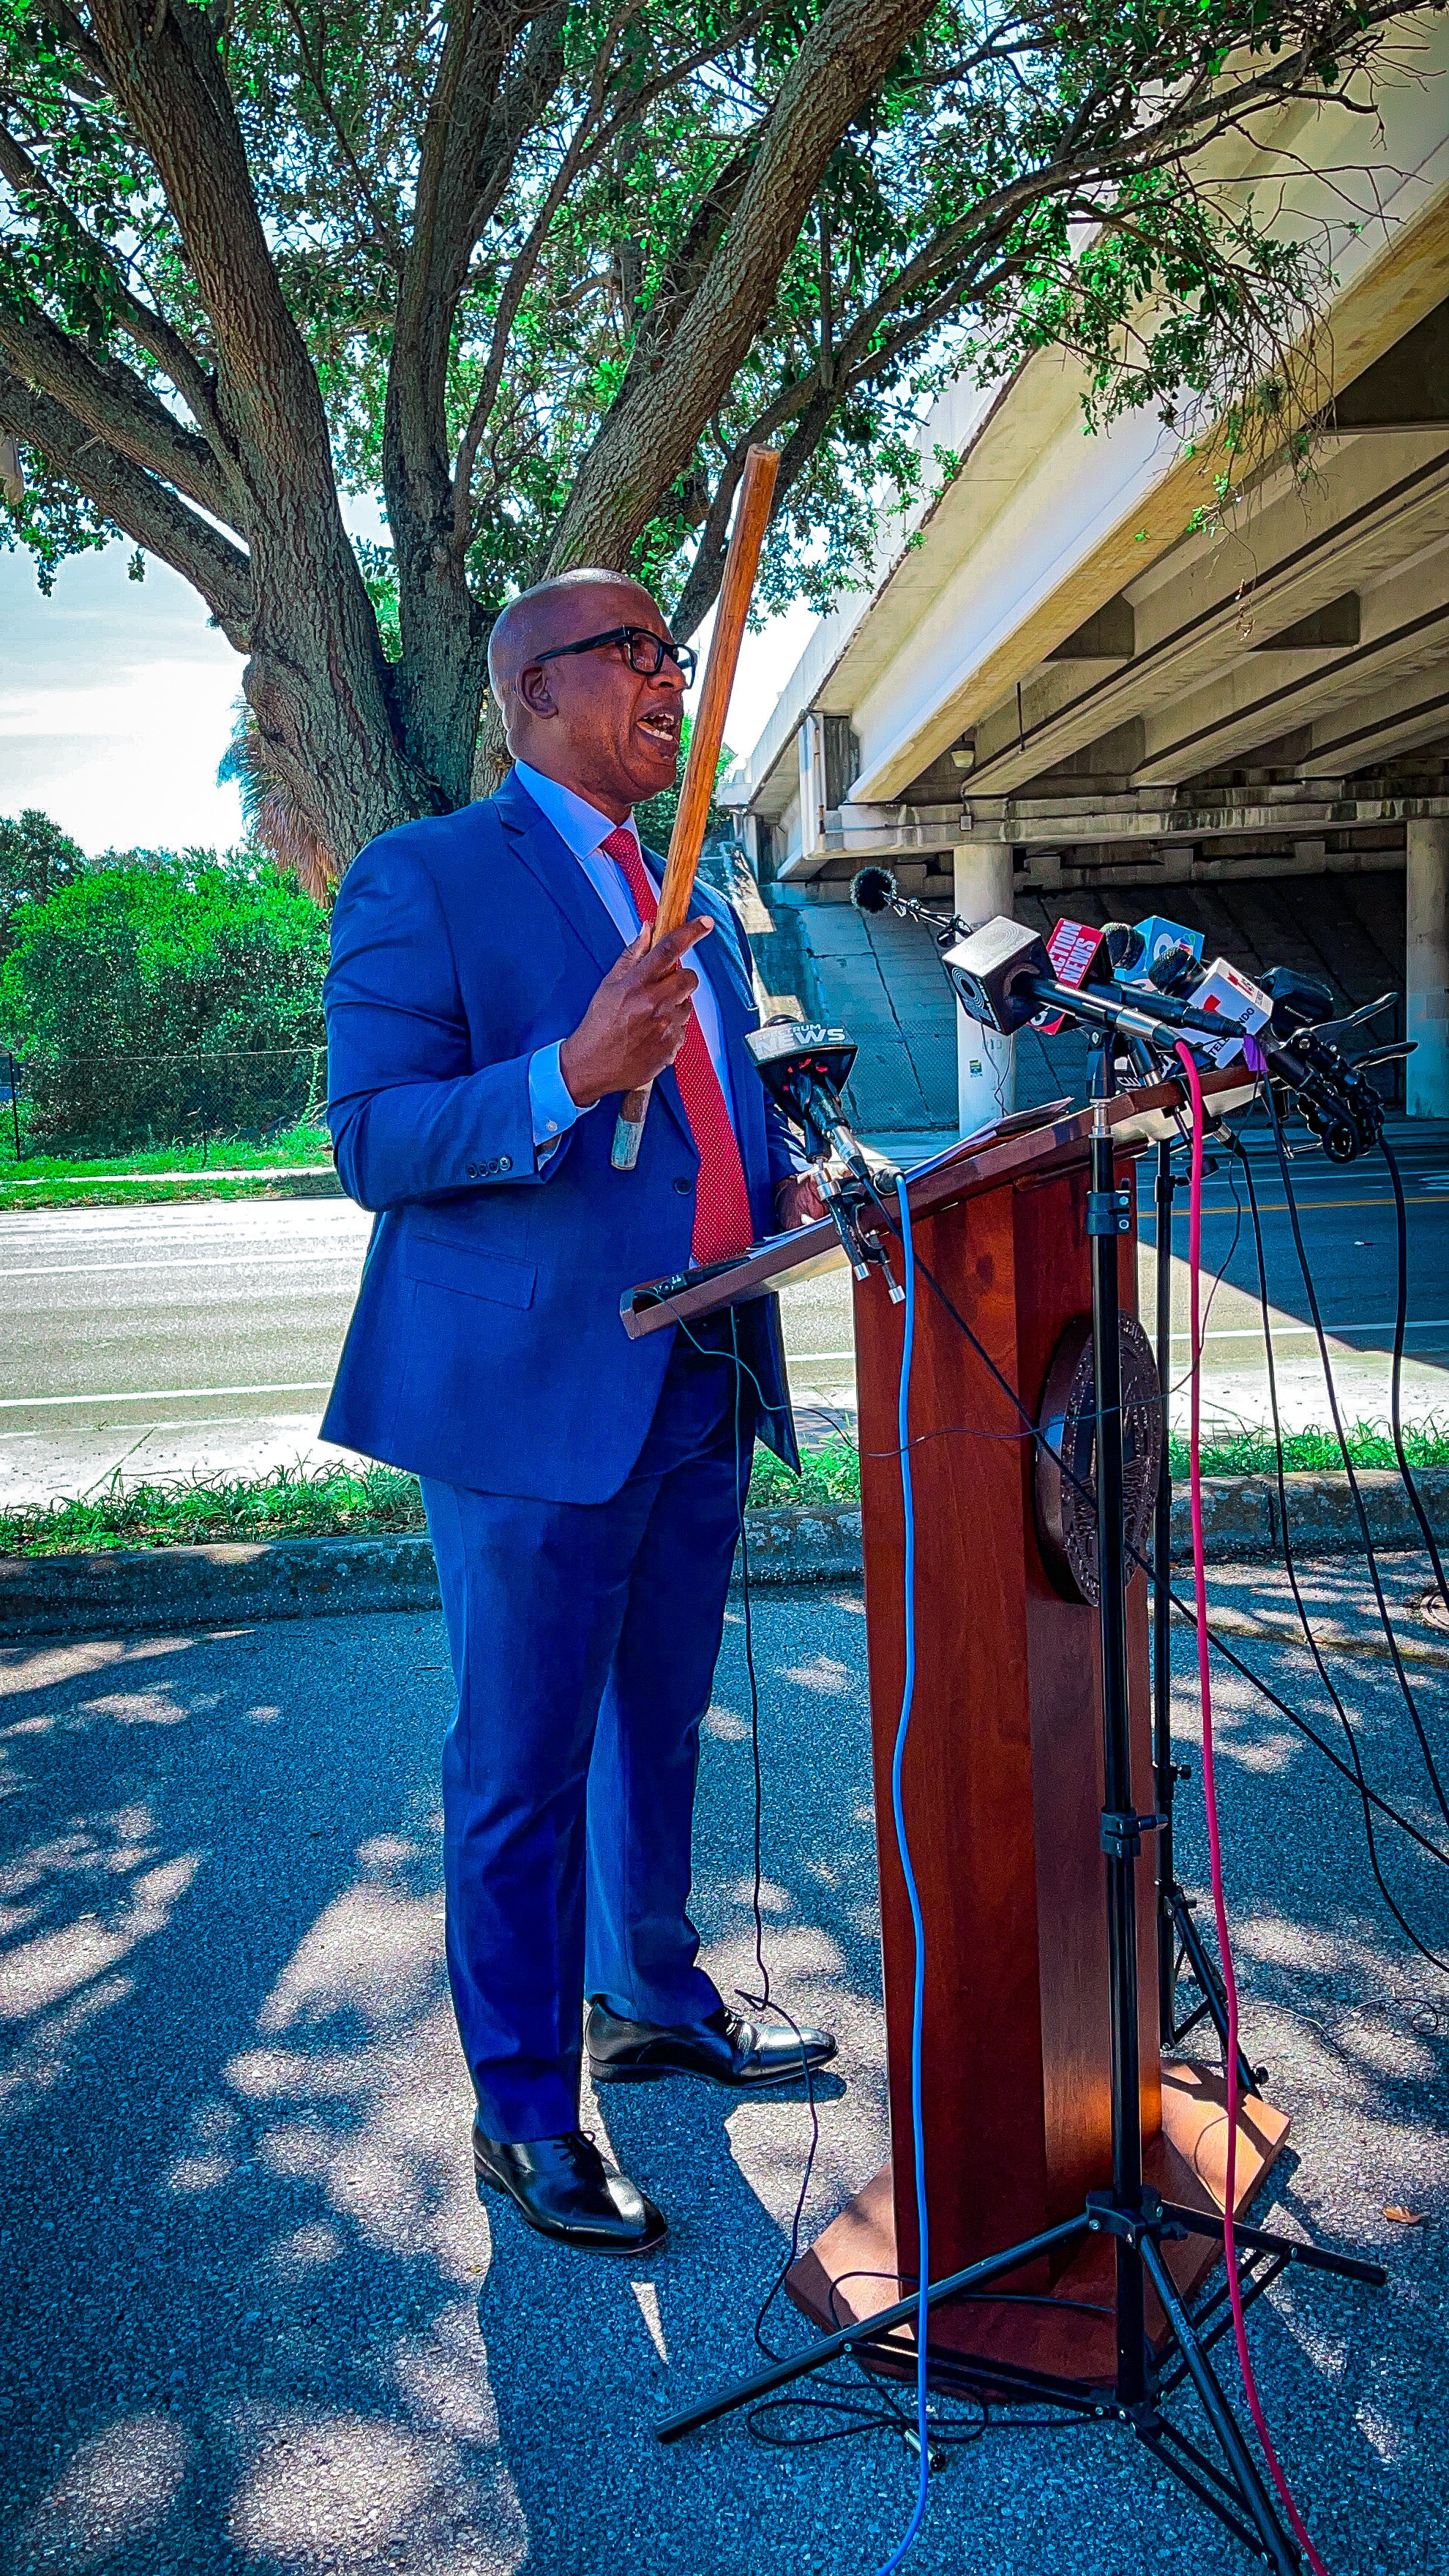 Mayor Welch Announces New Plans for Trop Site